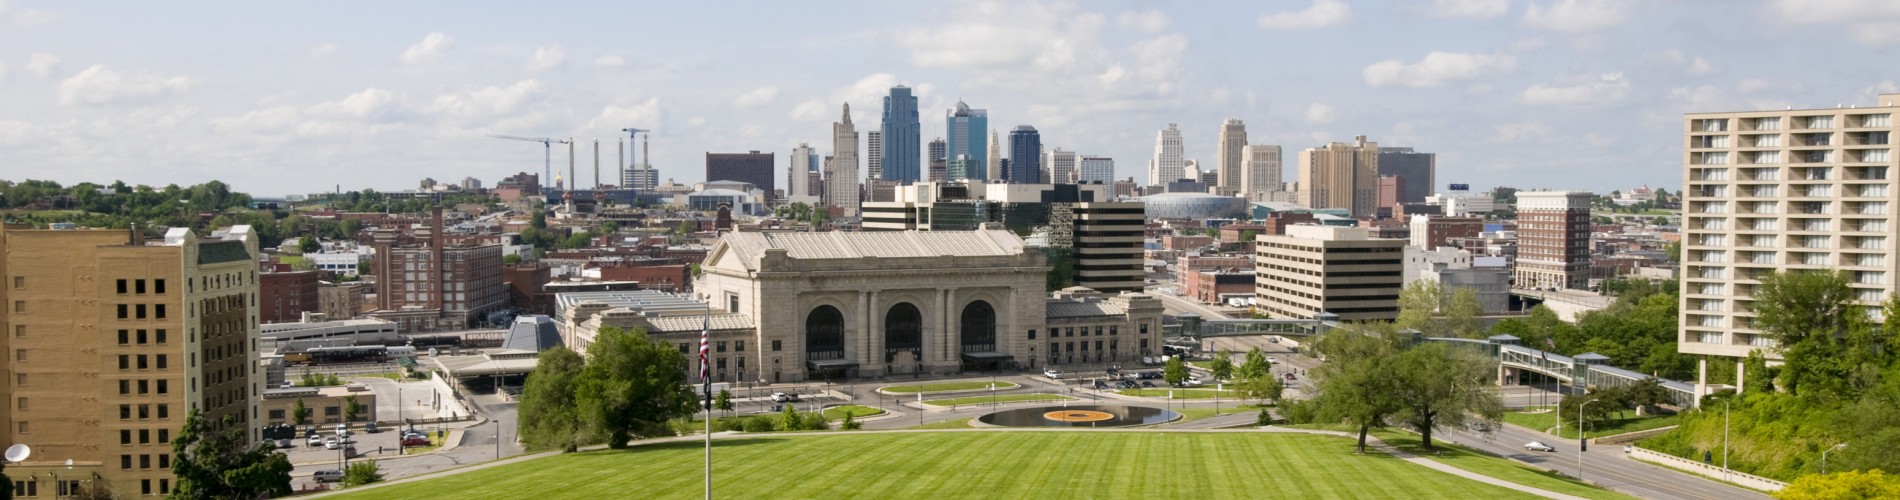 Wide-angle view of central Kansas City, with the Lincoln Memorial lawn, Union Station, and Crown Center in the foreground, and downtown Kansas City behind